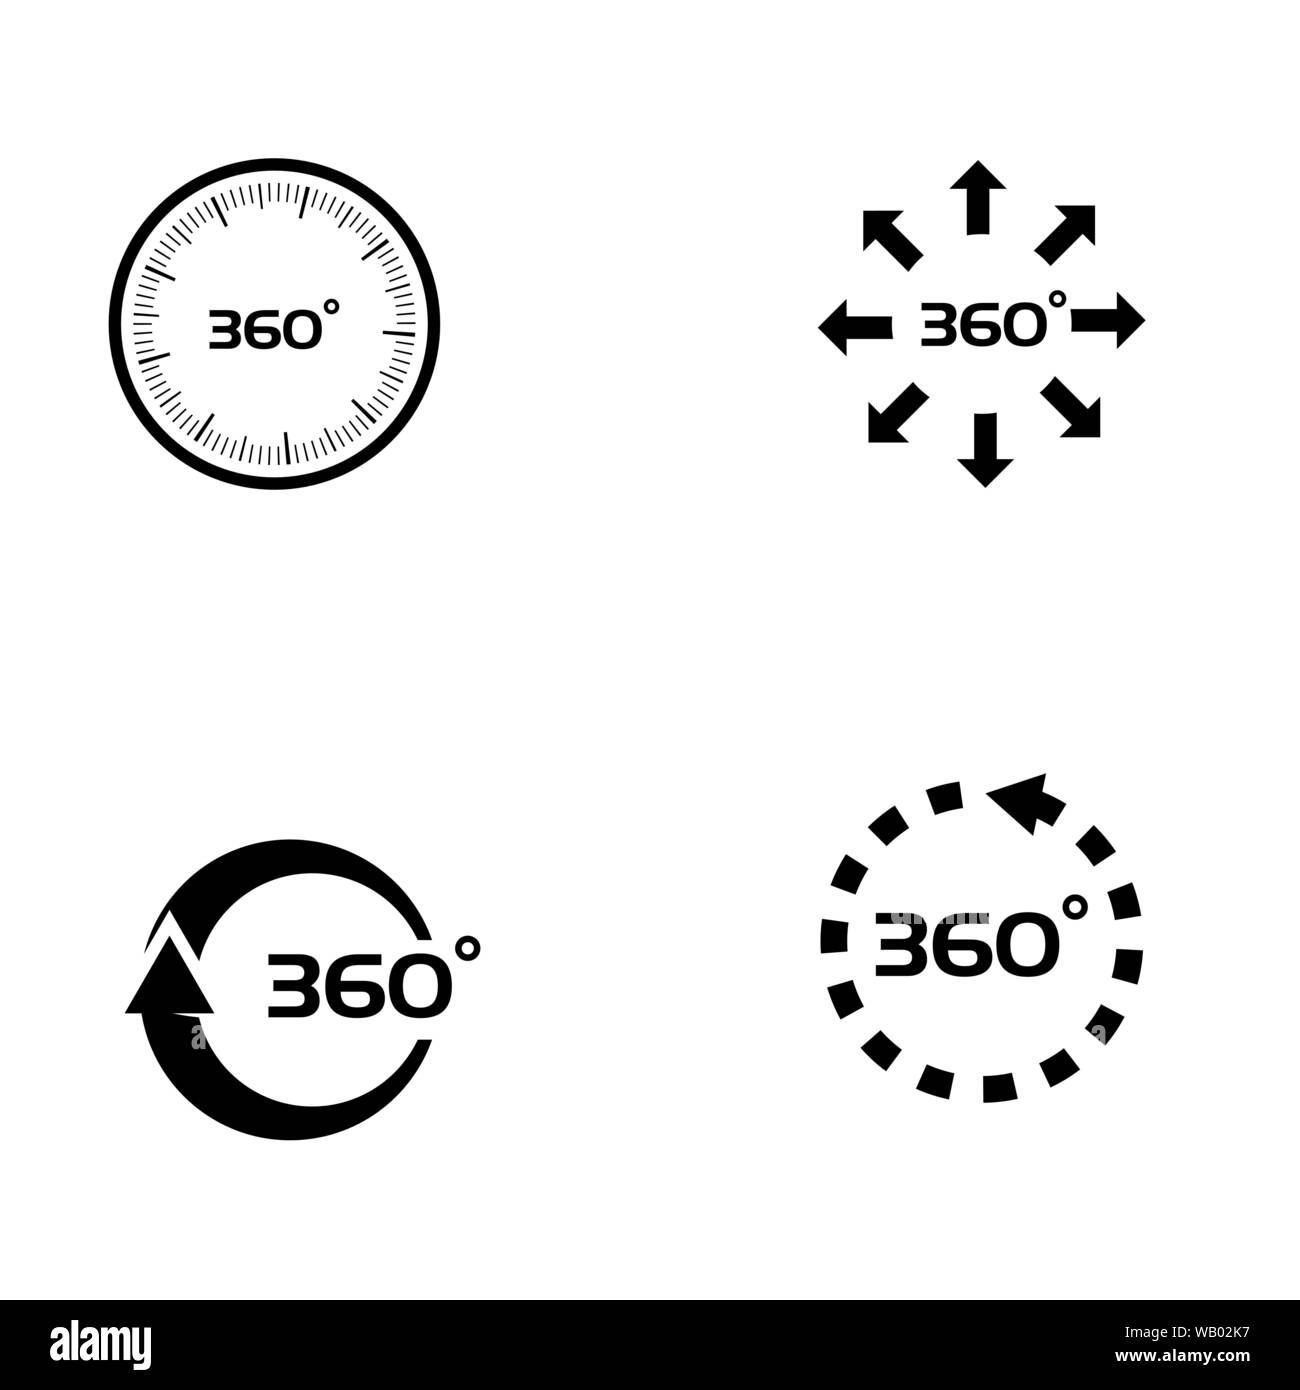 360 Degree View Related Vector Icons design template Stock Vector